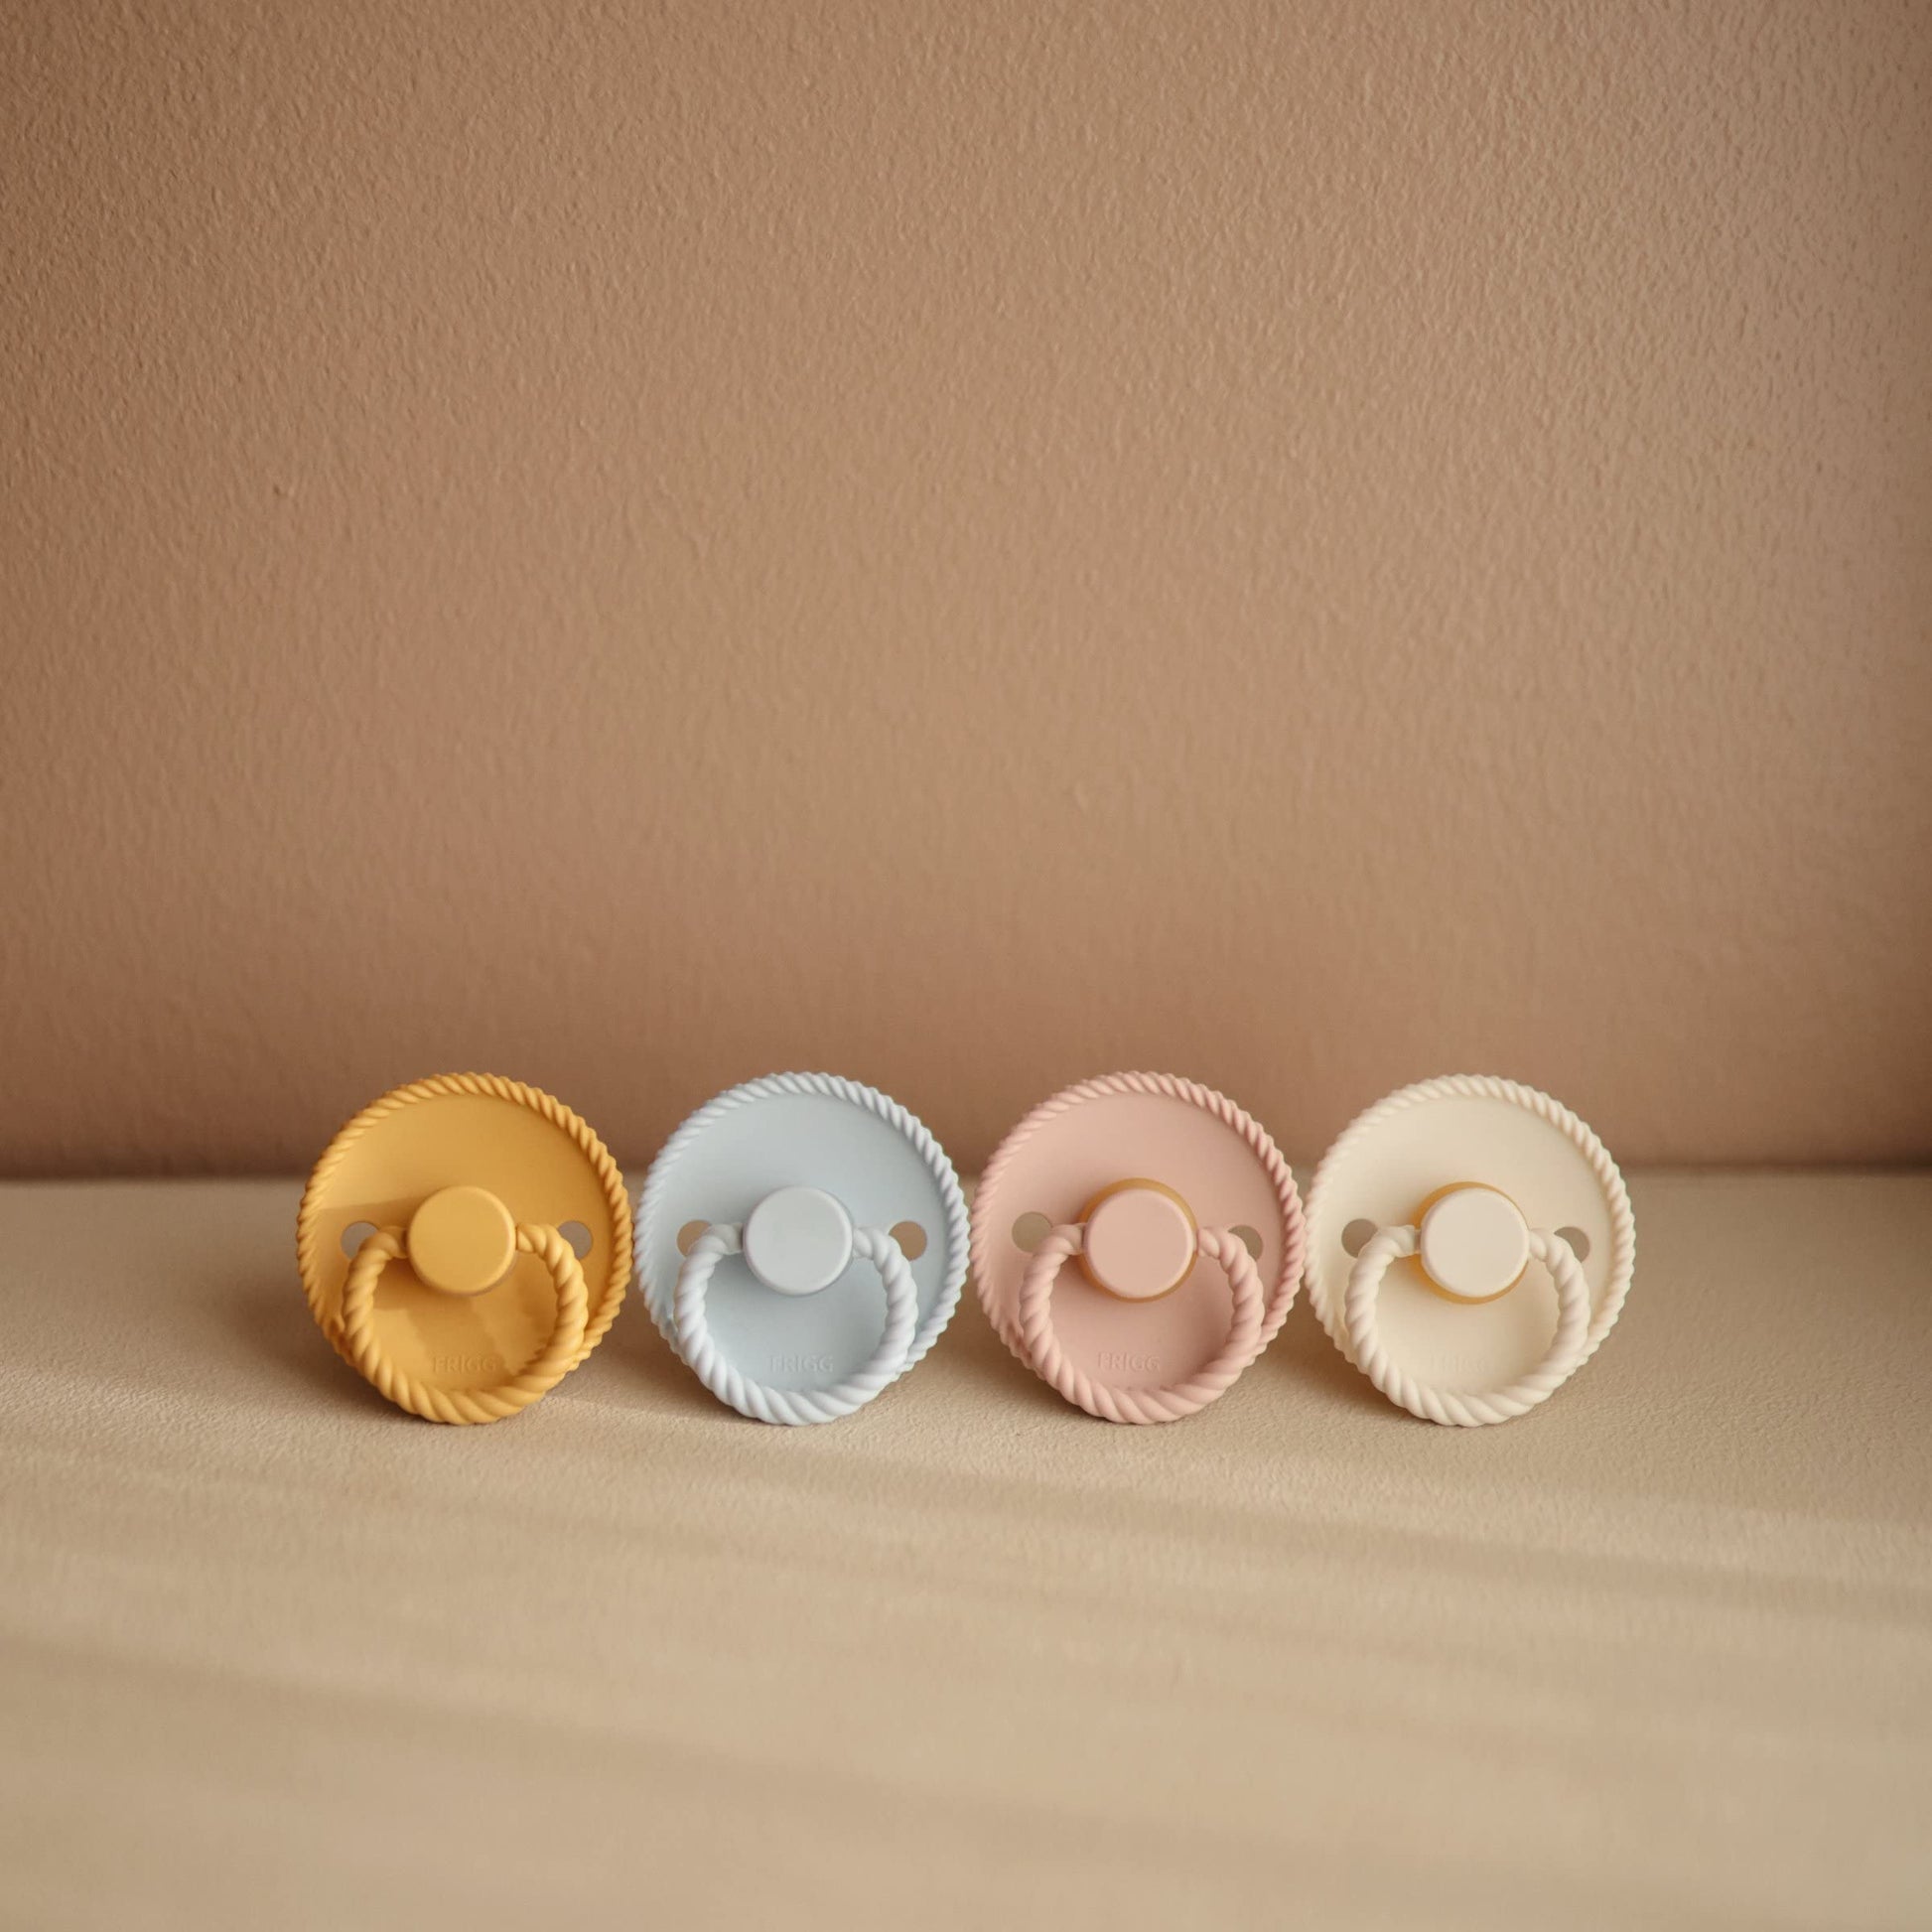 Frigg Rope Latex Baby Pacifier 0-6M, 2Pack, Blush/Cream - Size 1 - Laadlee